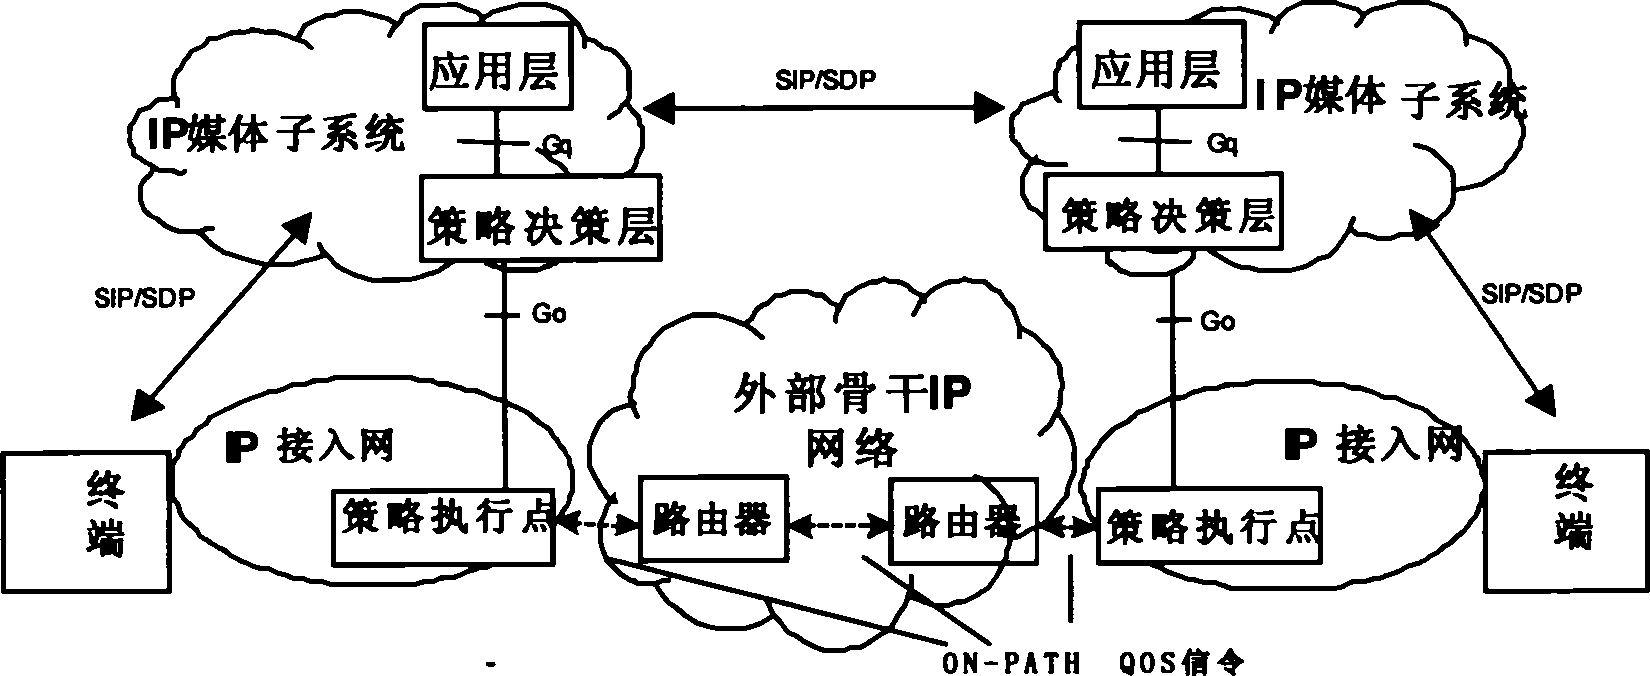 Arrangement method and system for end-to-end service quality between domains employing mixed path